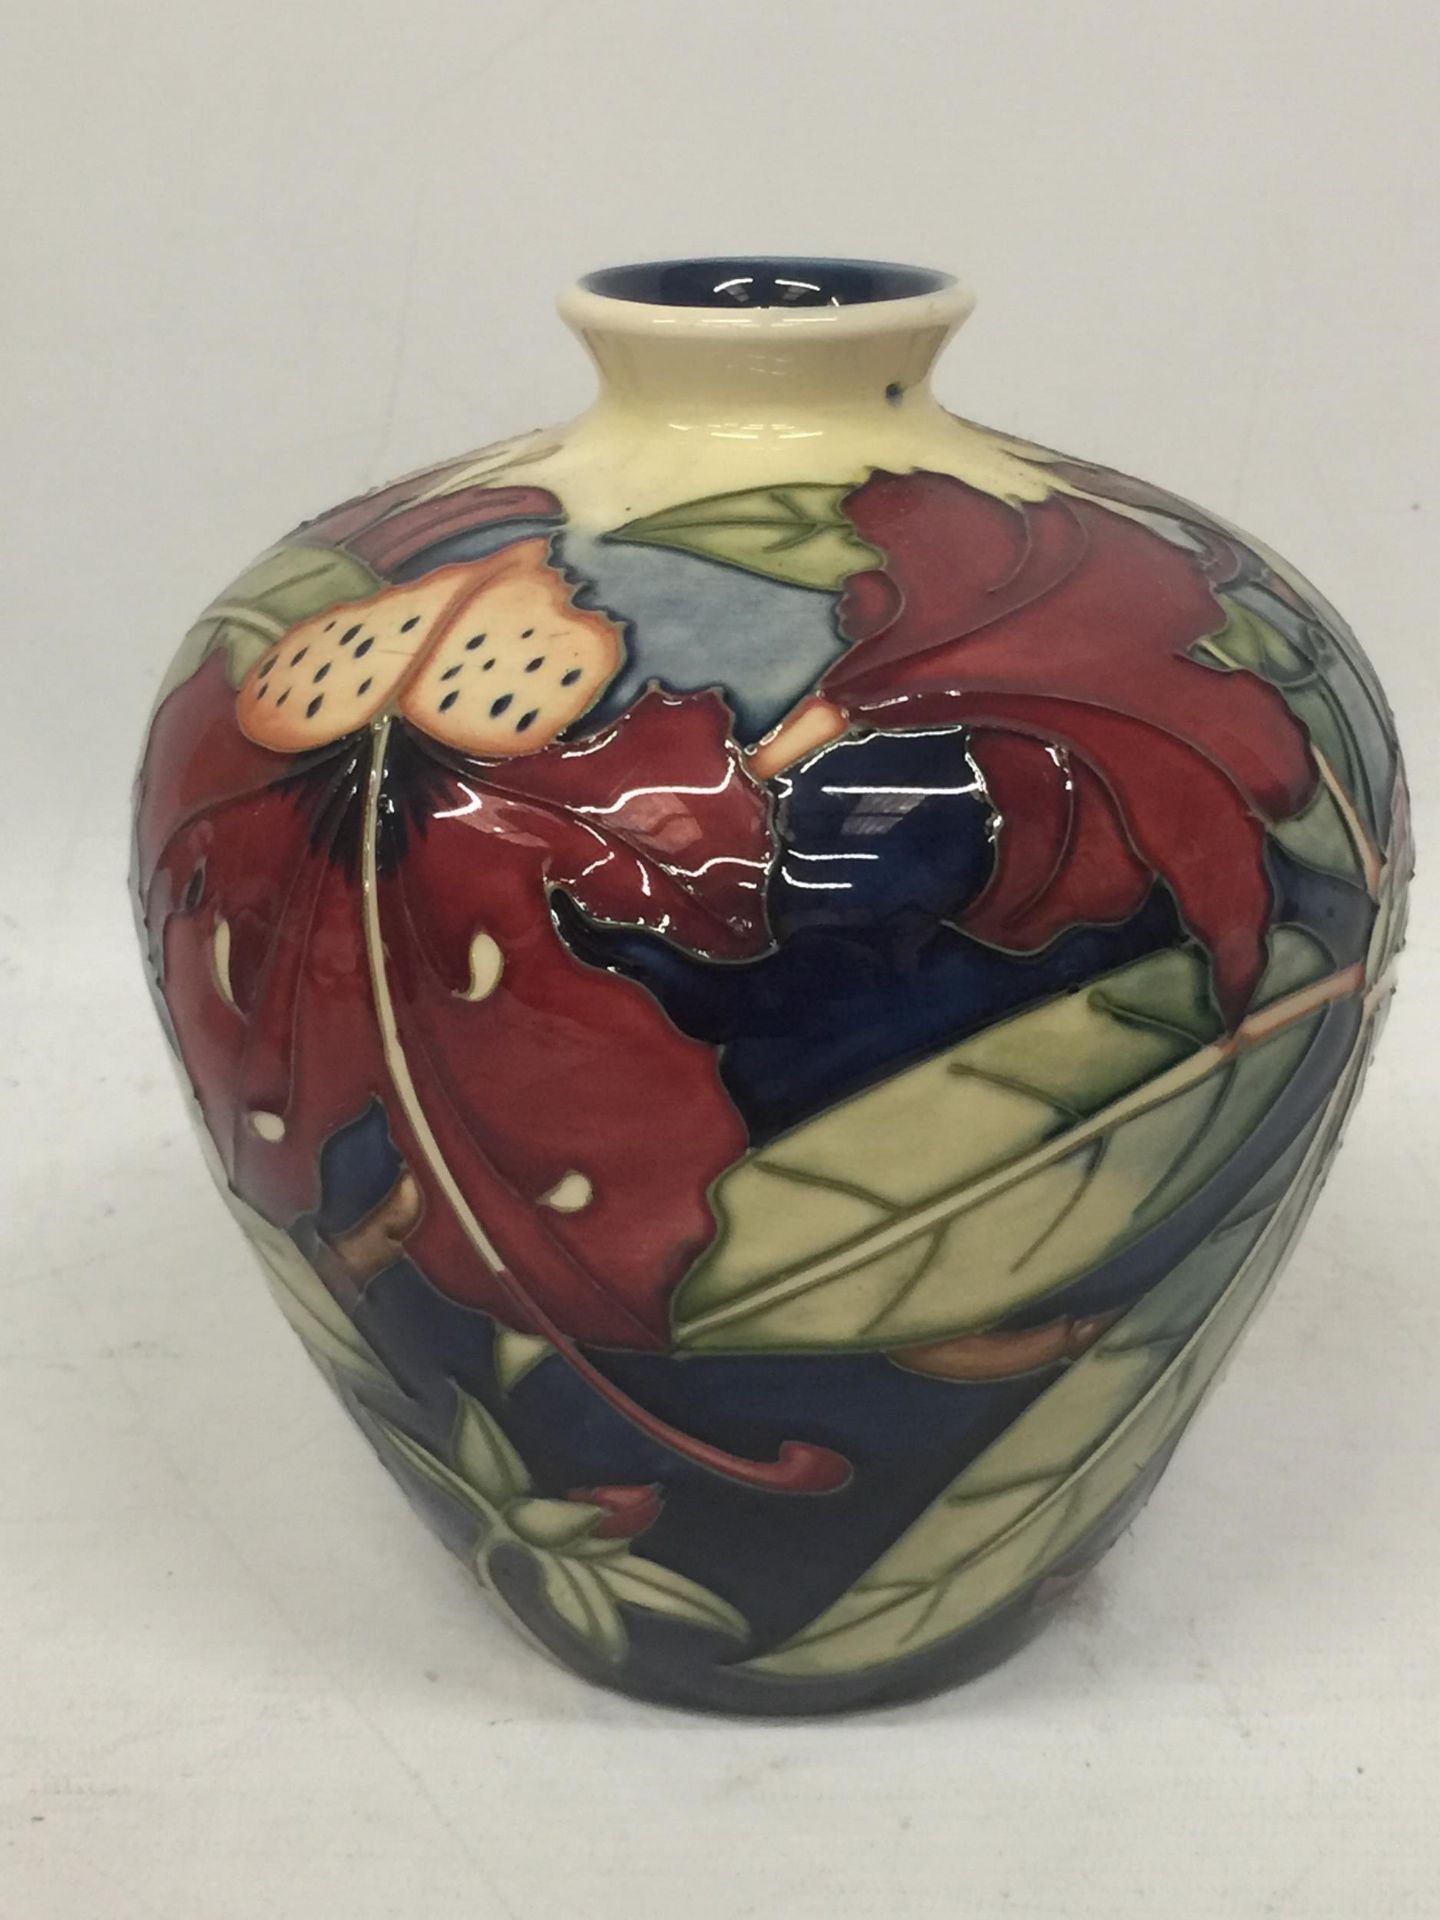 A MOORCROFT 'SIMEON' PATTERN VASE BY PHILIP GIBSON, SECONDS - Image 2 of 4